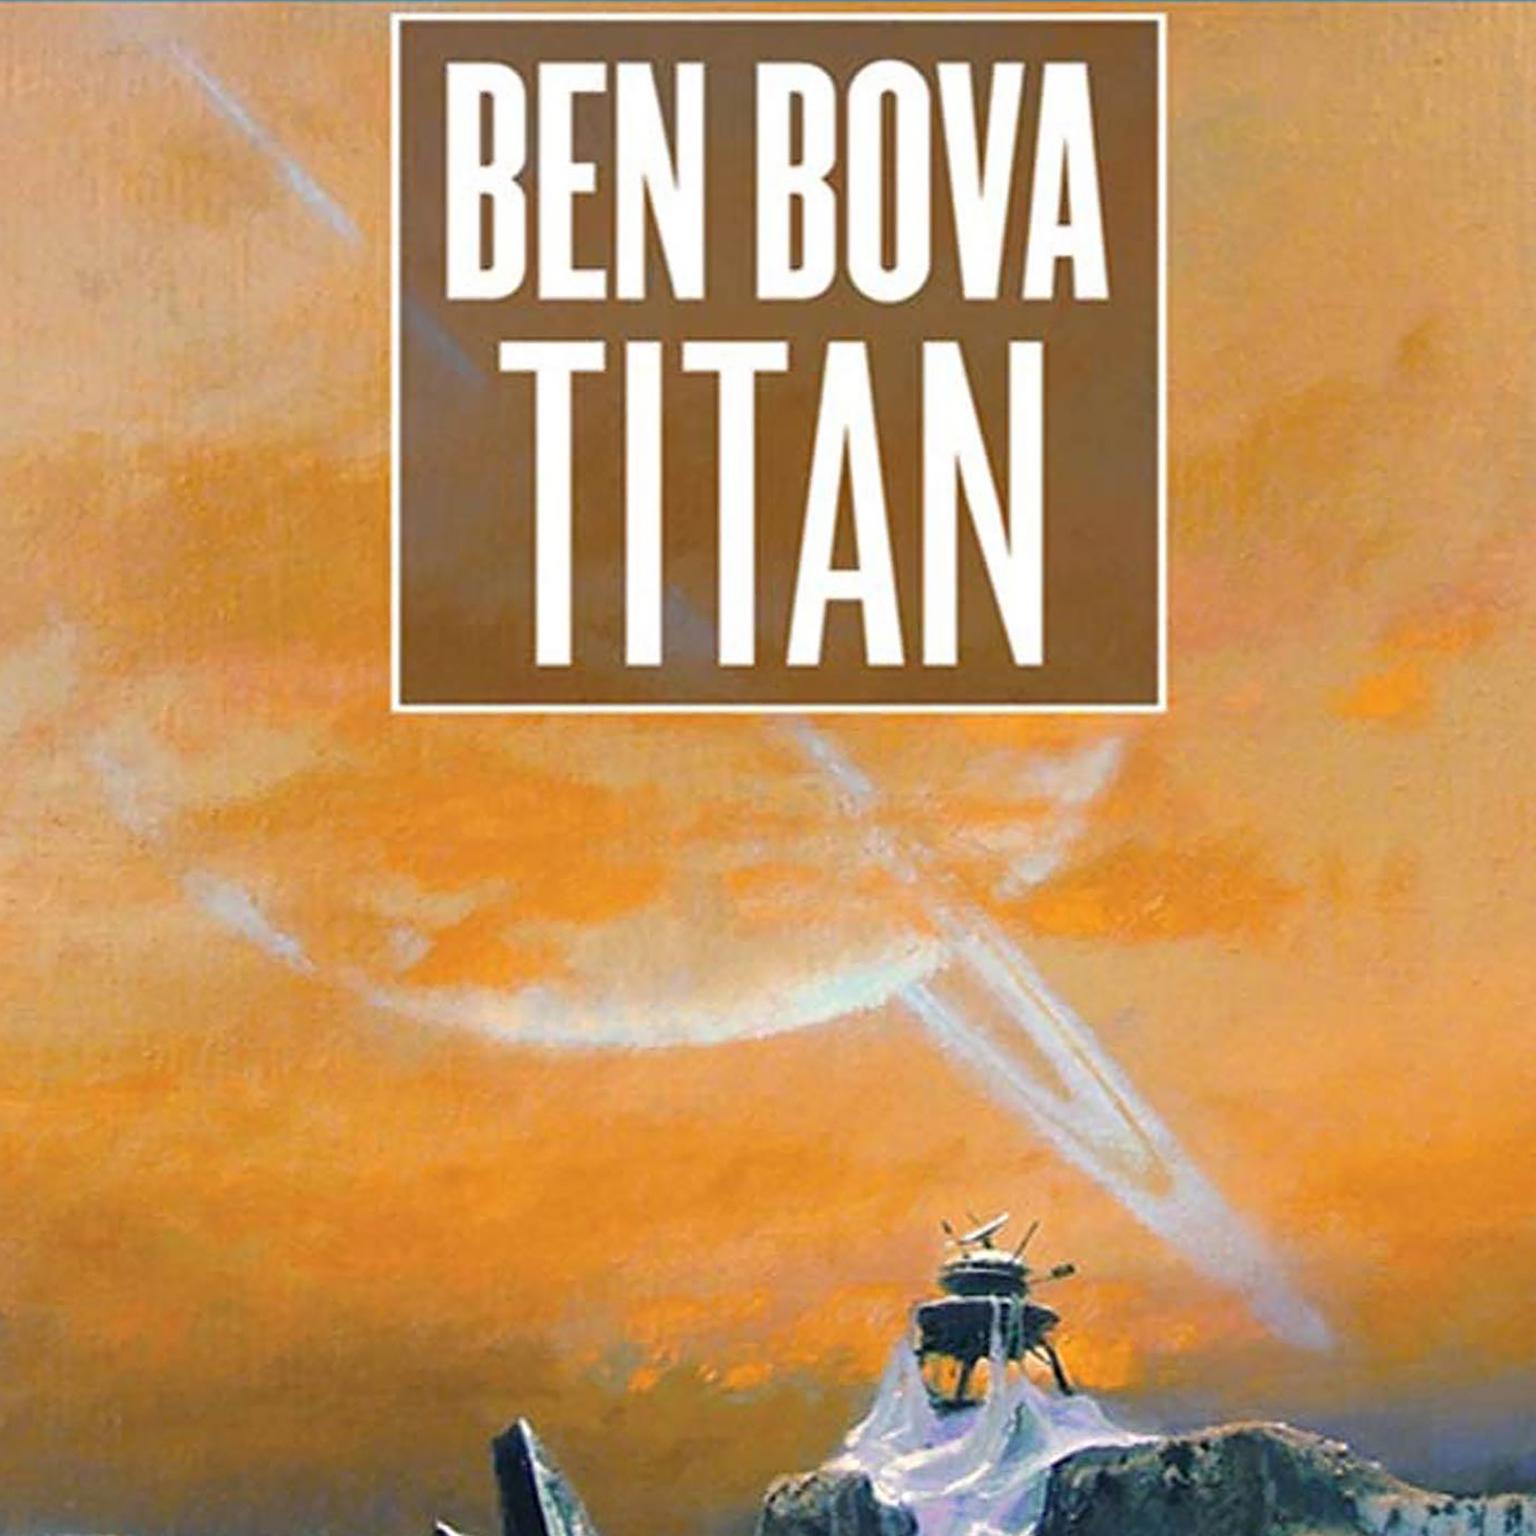 Titan: A Tale of Cataclysmic Discovery Audiobook, by Ben Bova